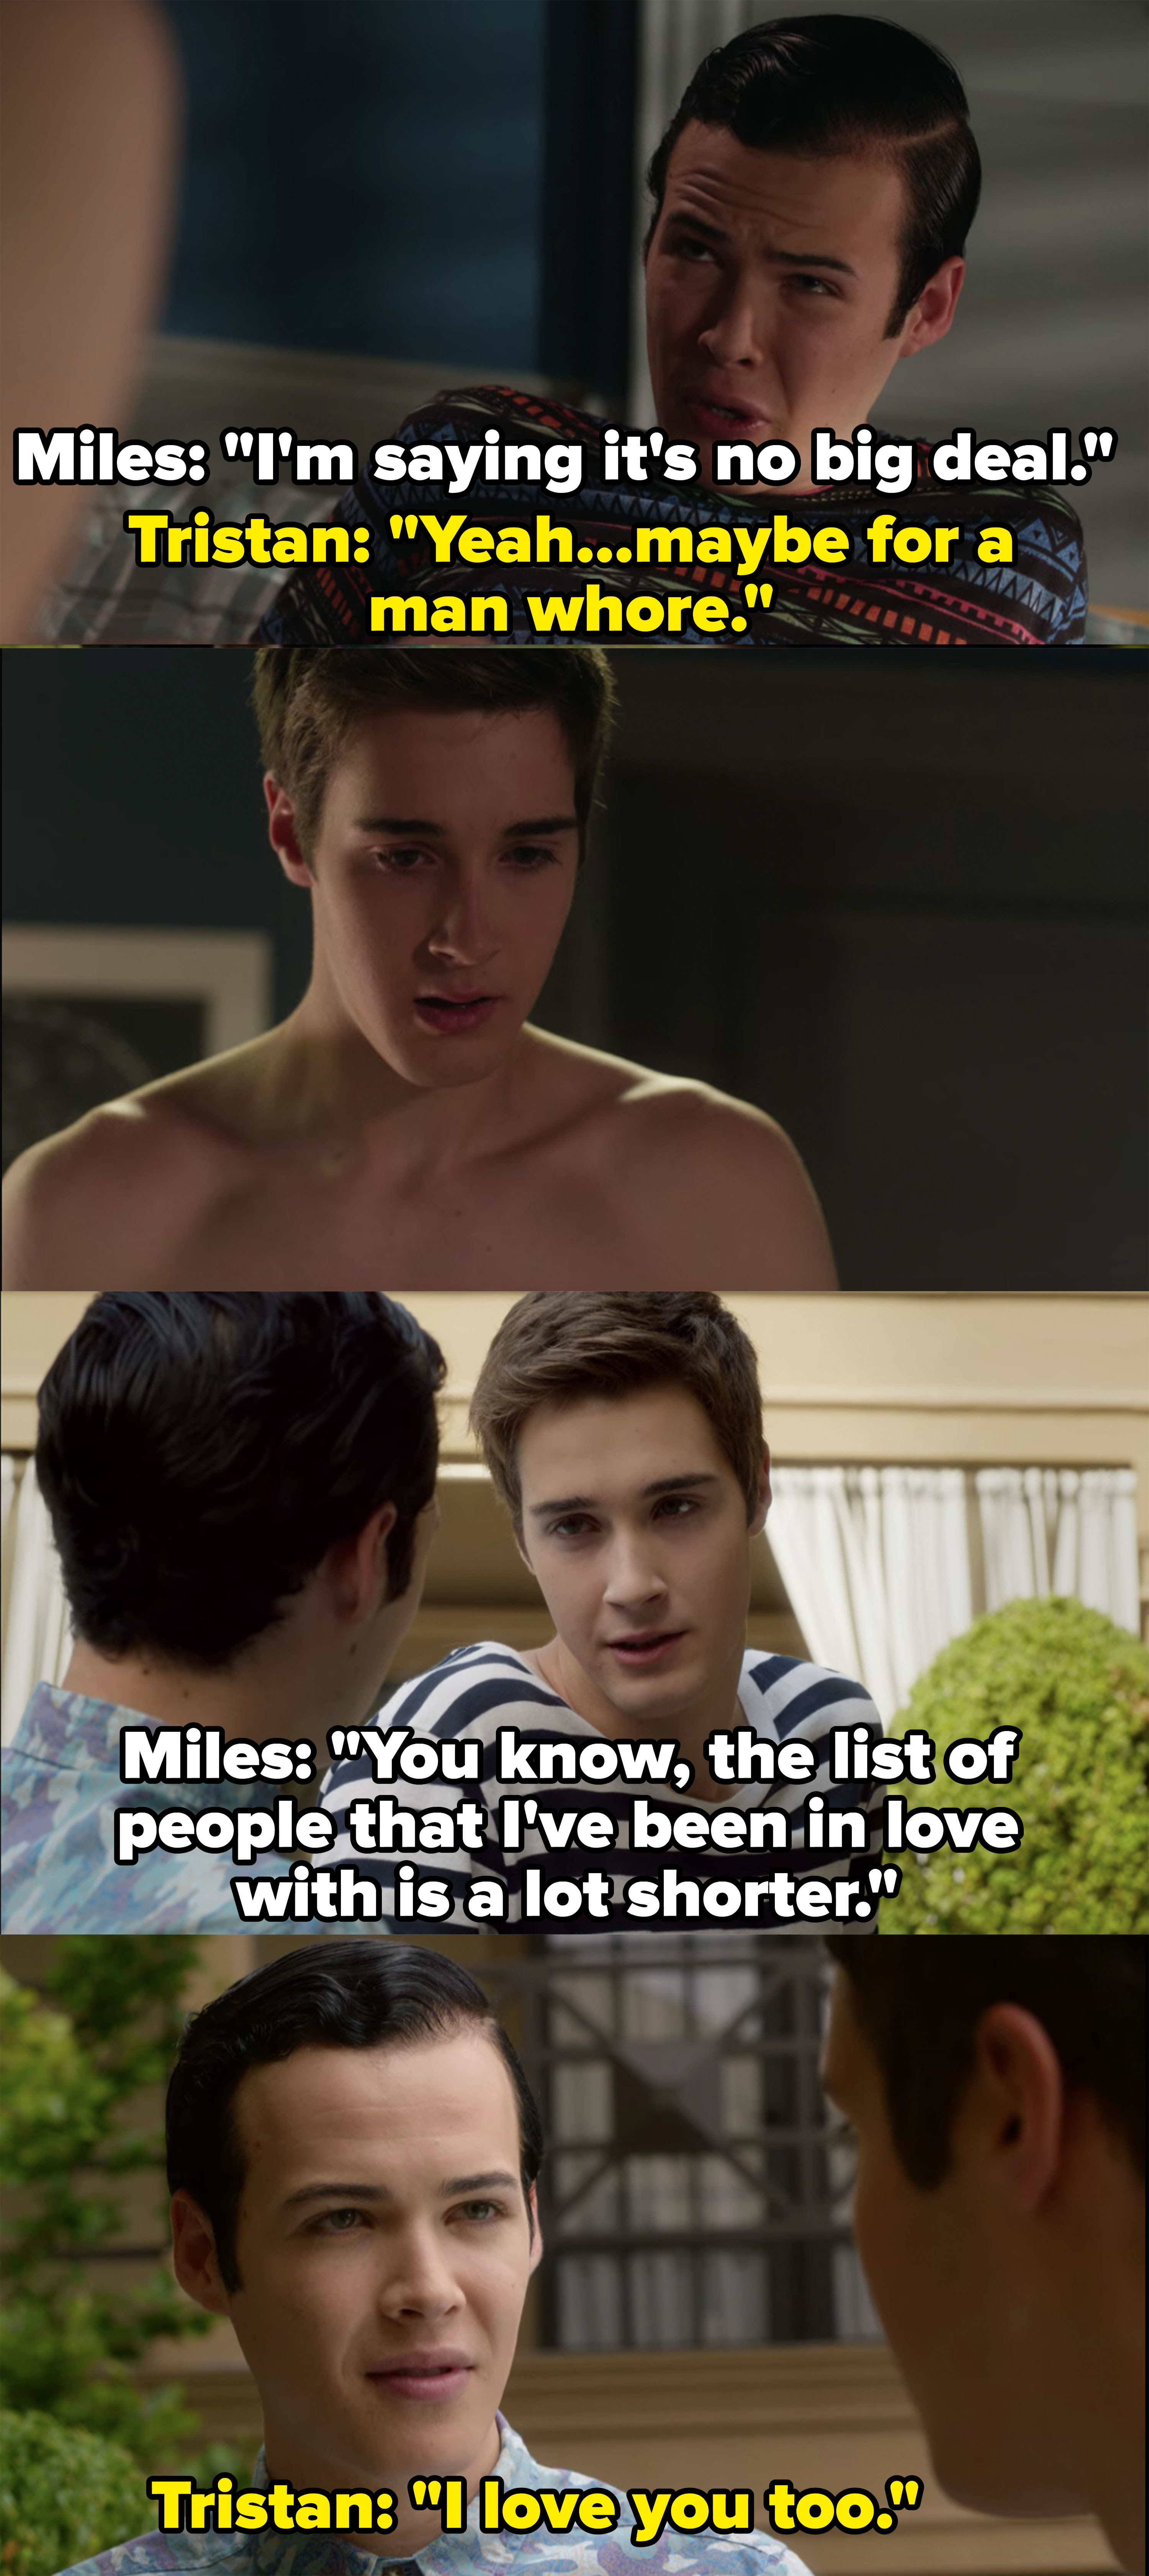 Miles says sex is no big deal, Tristan responds, &quot;Yeah maybe for a man whore,&quot; in a later scene Miles says &quot;The list of people that I&#x27;ve been in love with is a lot shorter&quot; and Tristan says he loves him too, they have sex